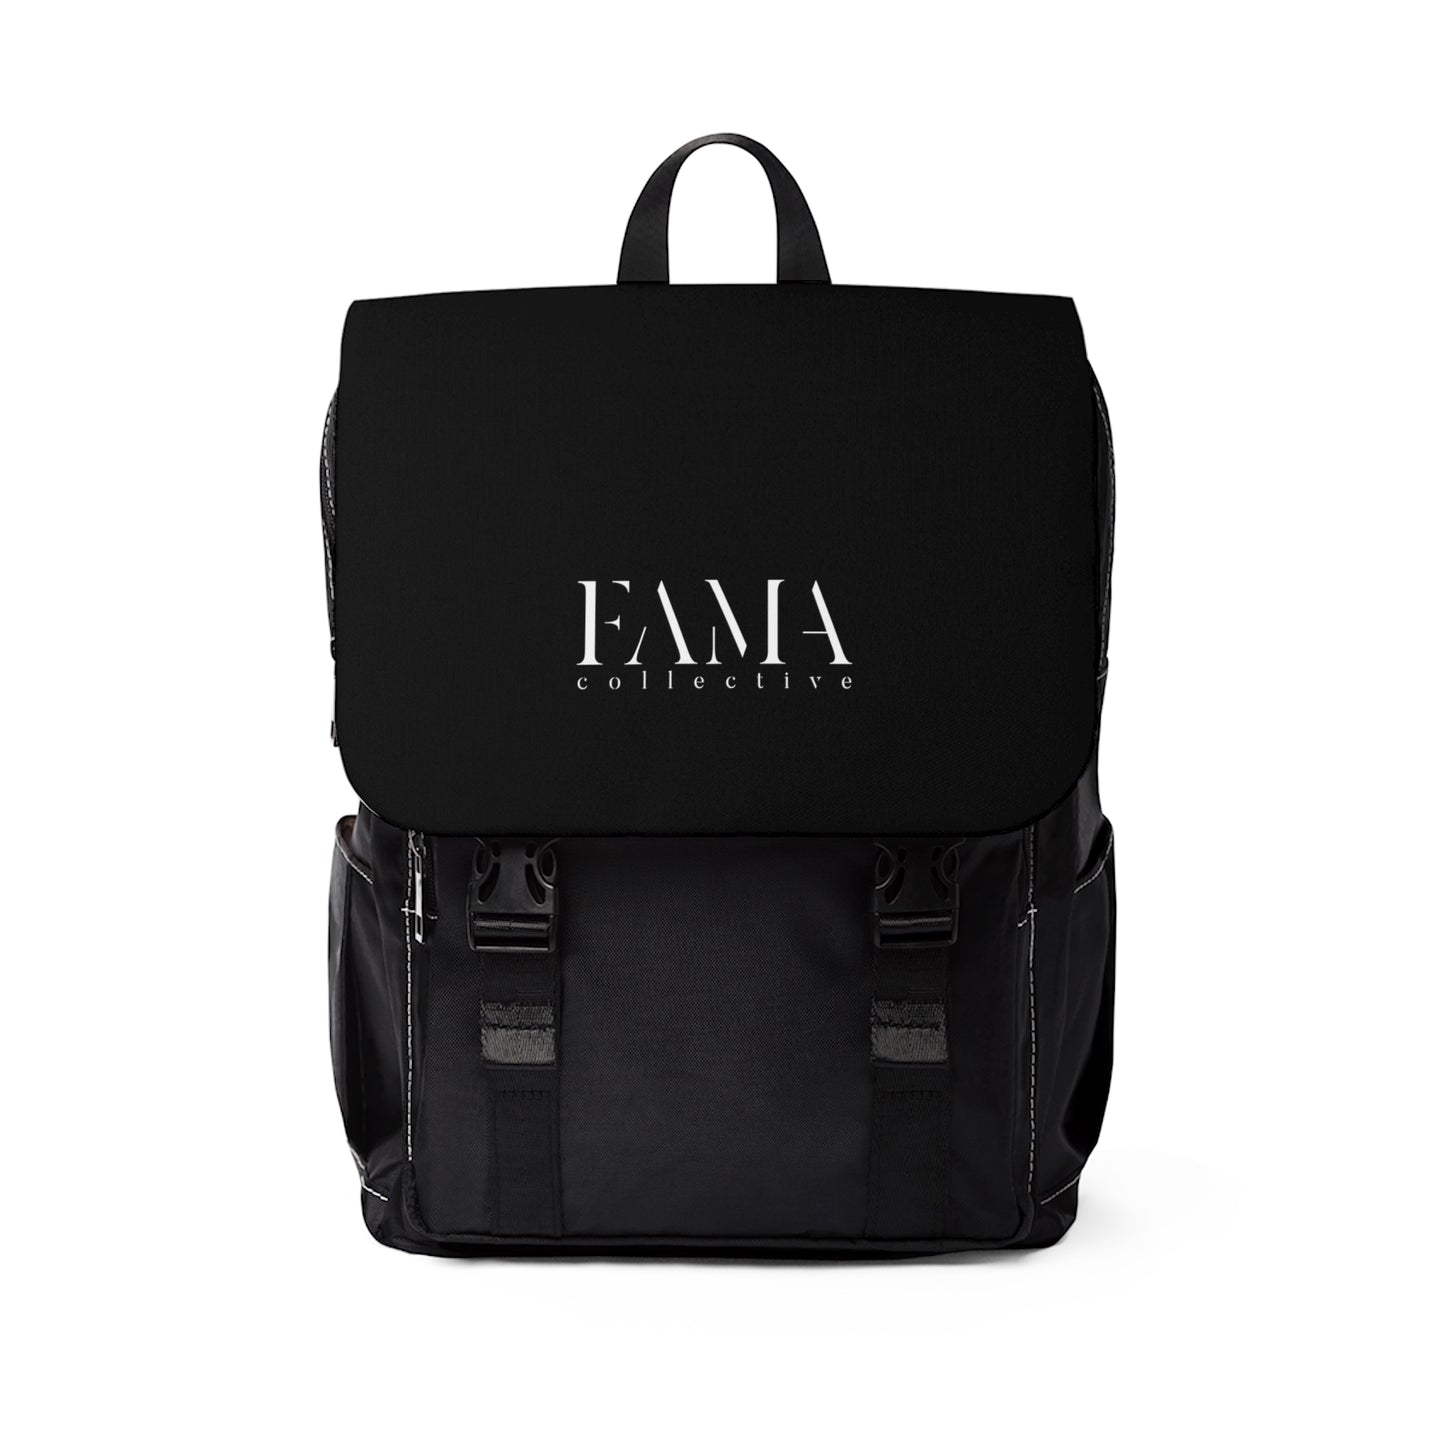 FAMA Collective Backpack